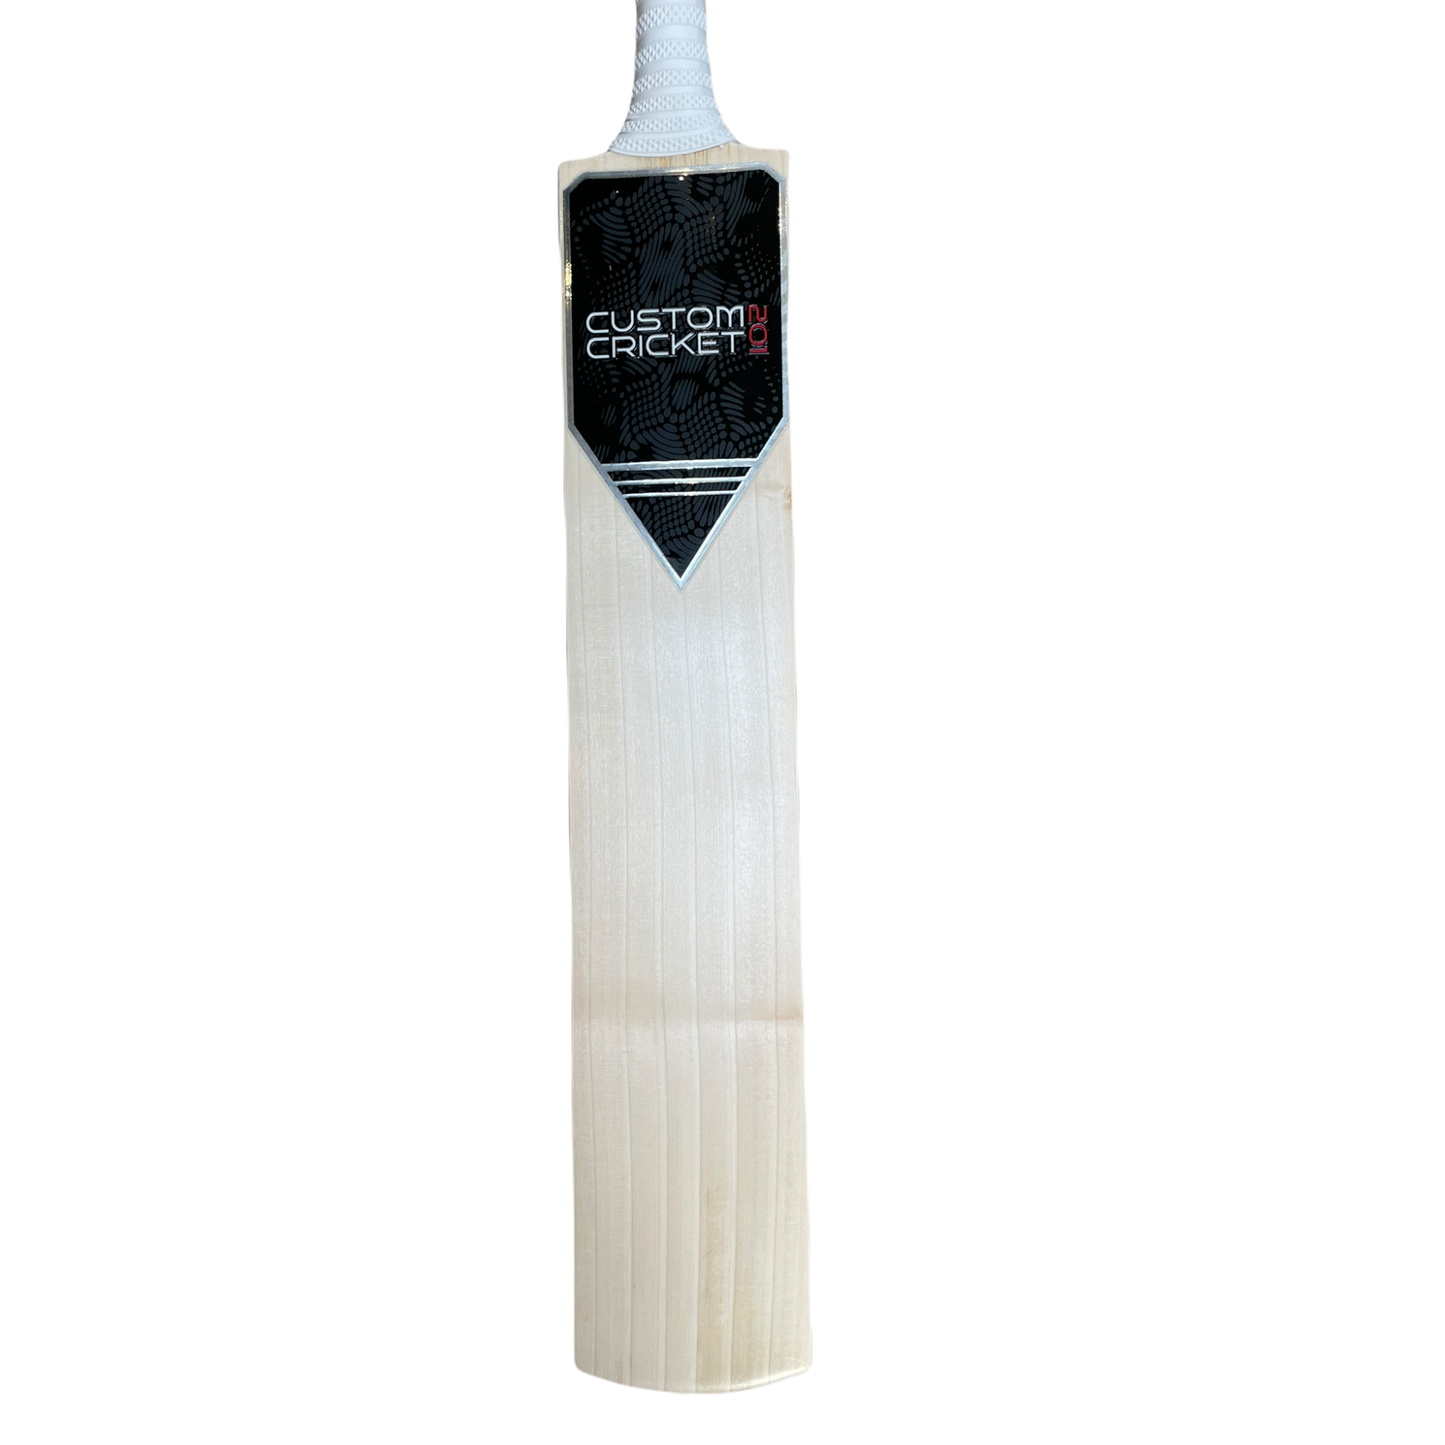 Custom Cricket 201 Handmade Handcrafted Cricket Bats SH LH Harrow Size 6 Cricket store East Sussex Hove Next day delivery and same day pick up